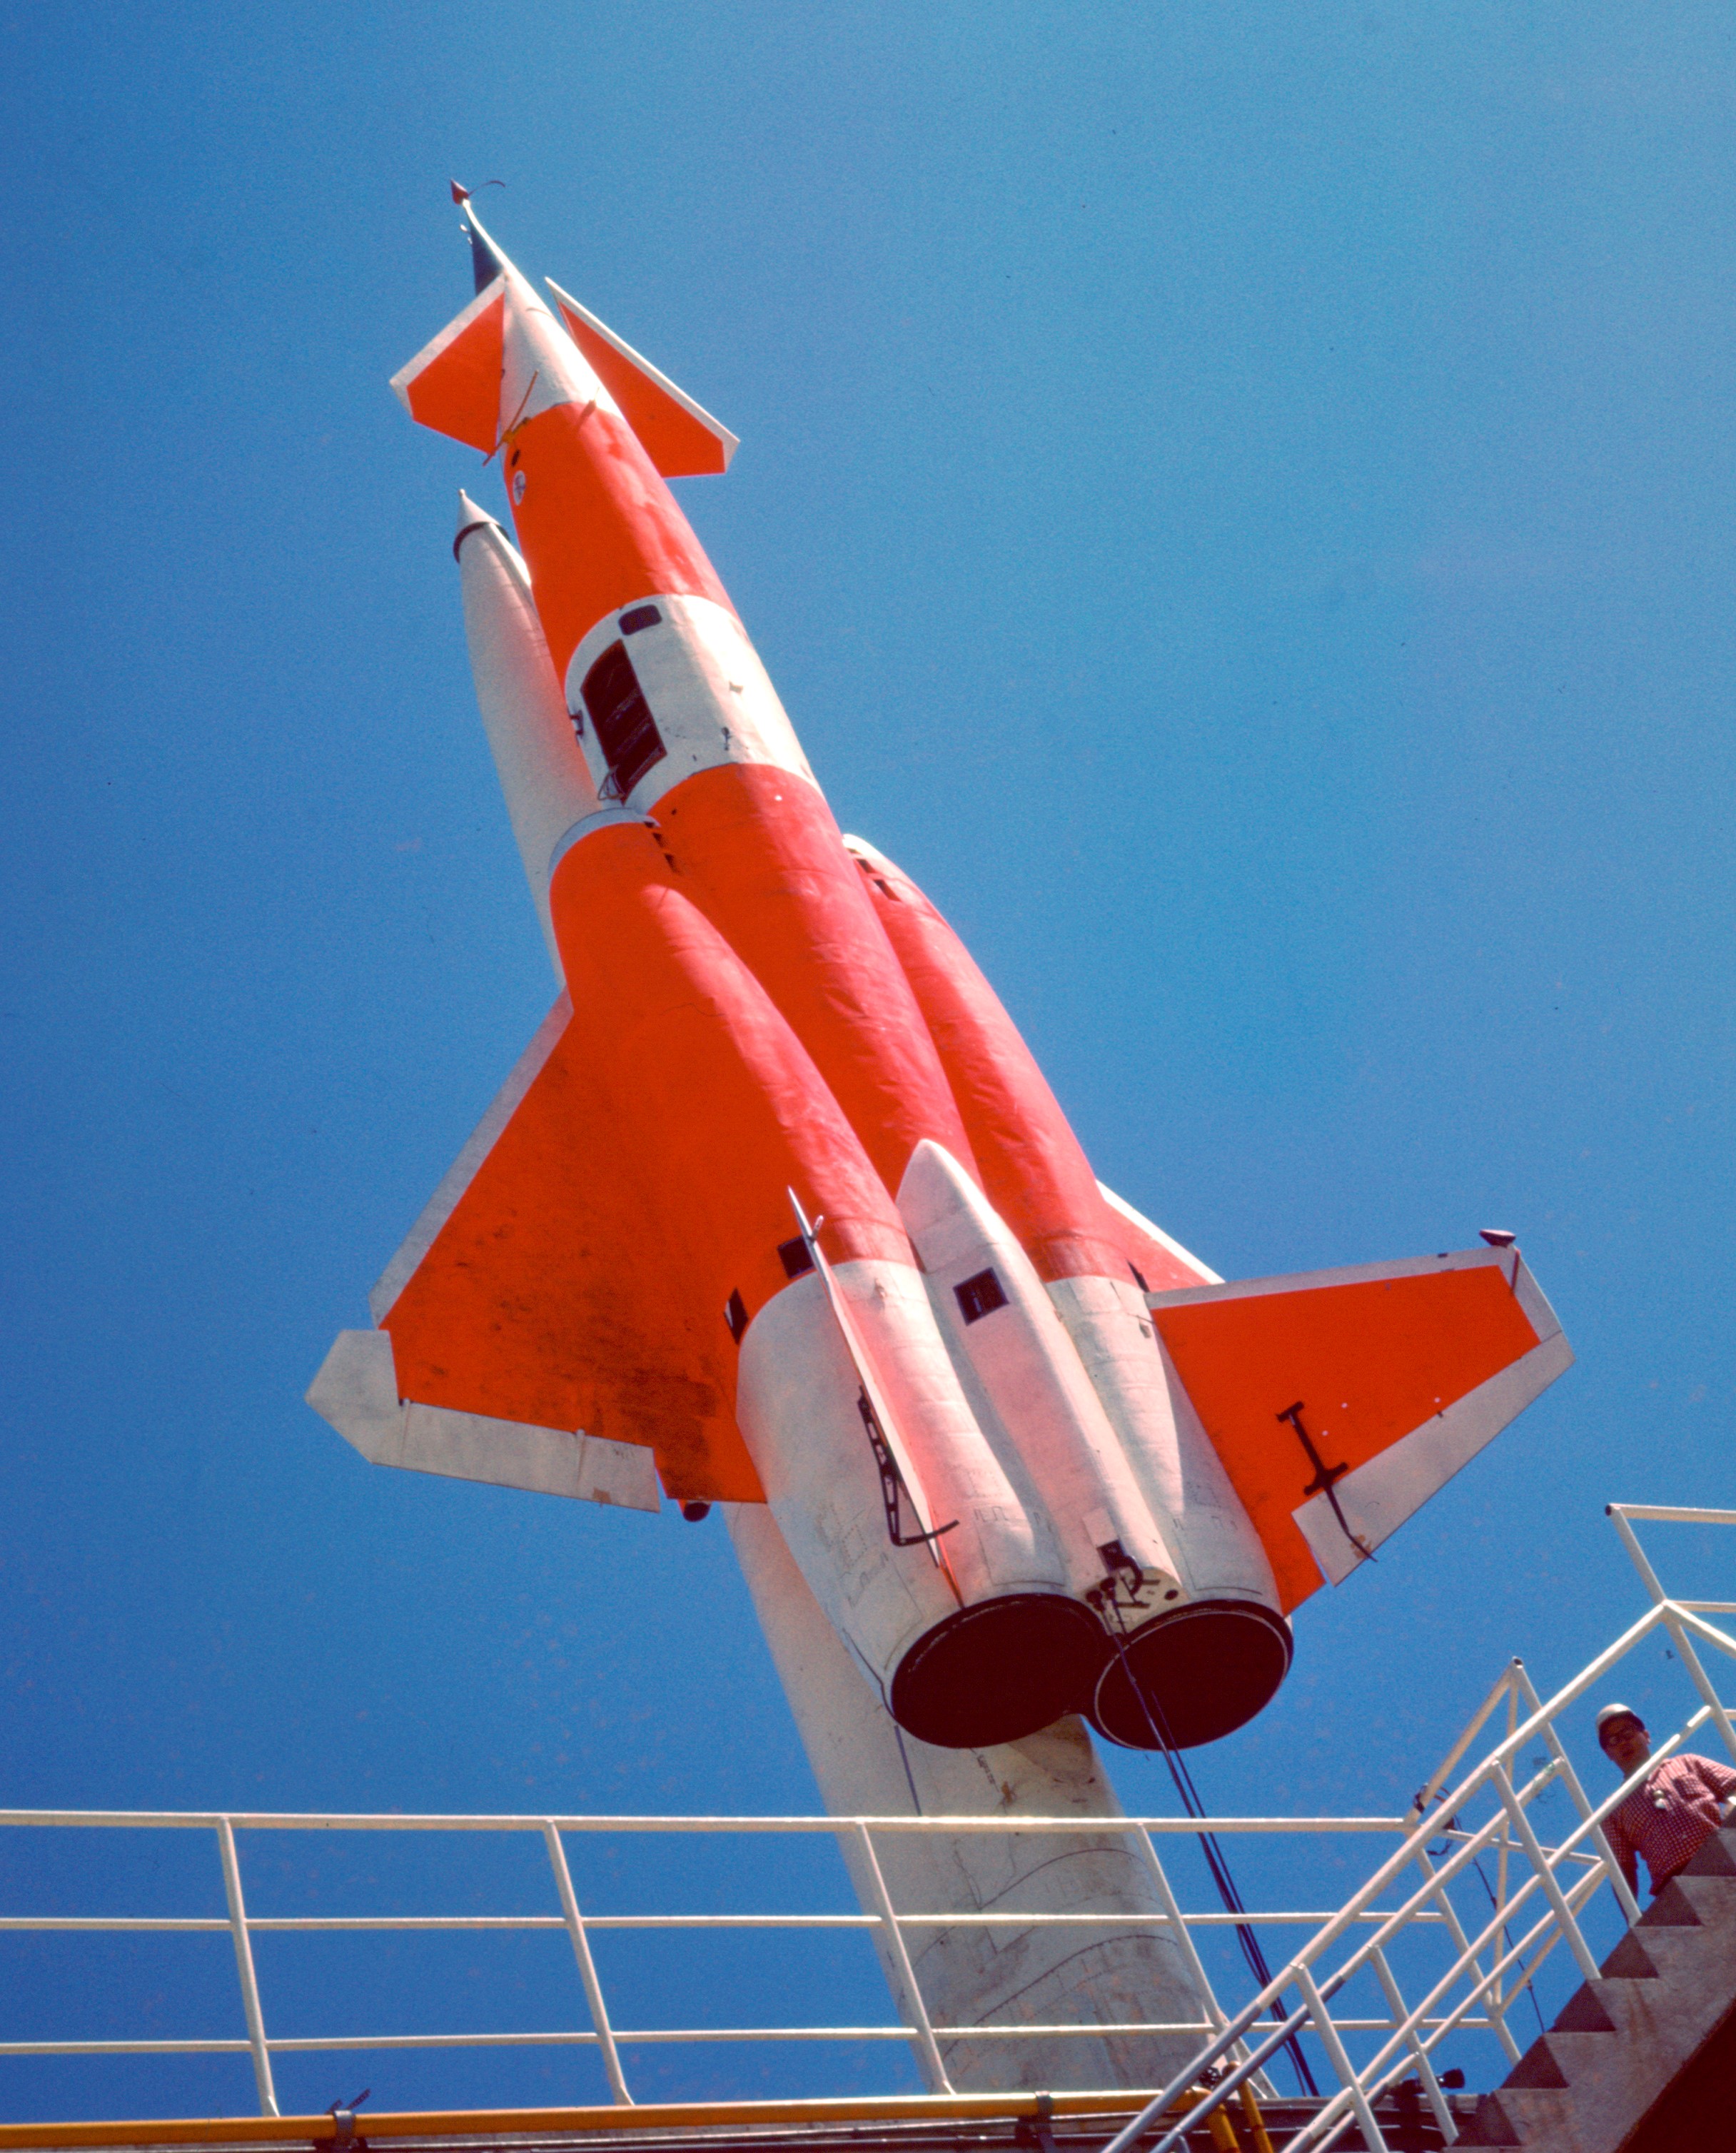  Many of the Navaho missiles launched from the Air Force Missile Test Center were painted in bright color schemes to facilitate in long-range tracking.